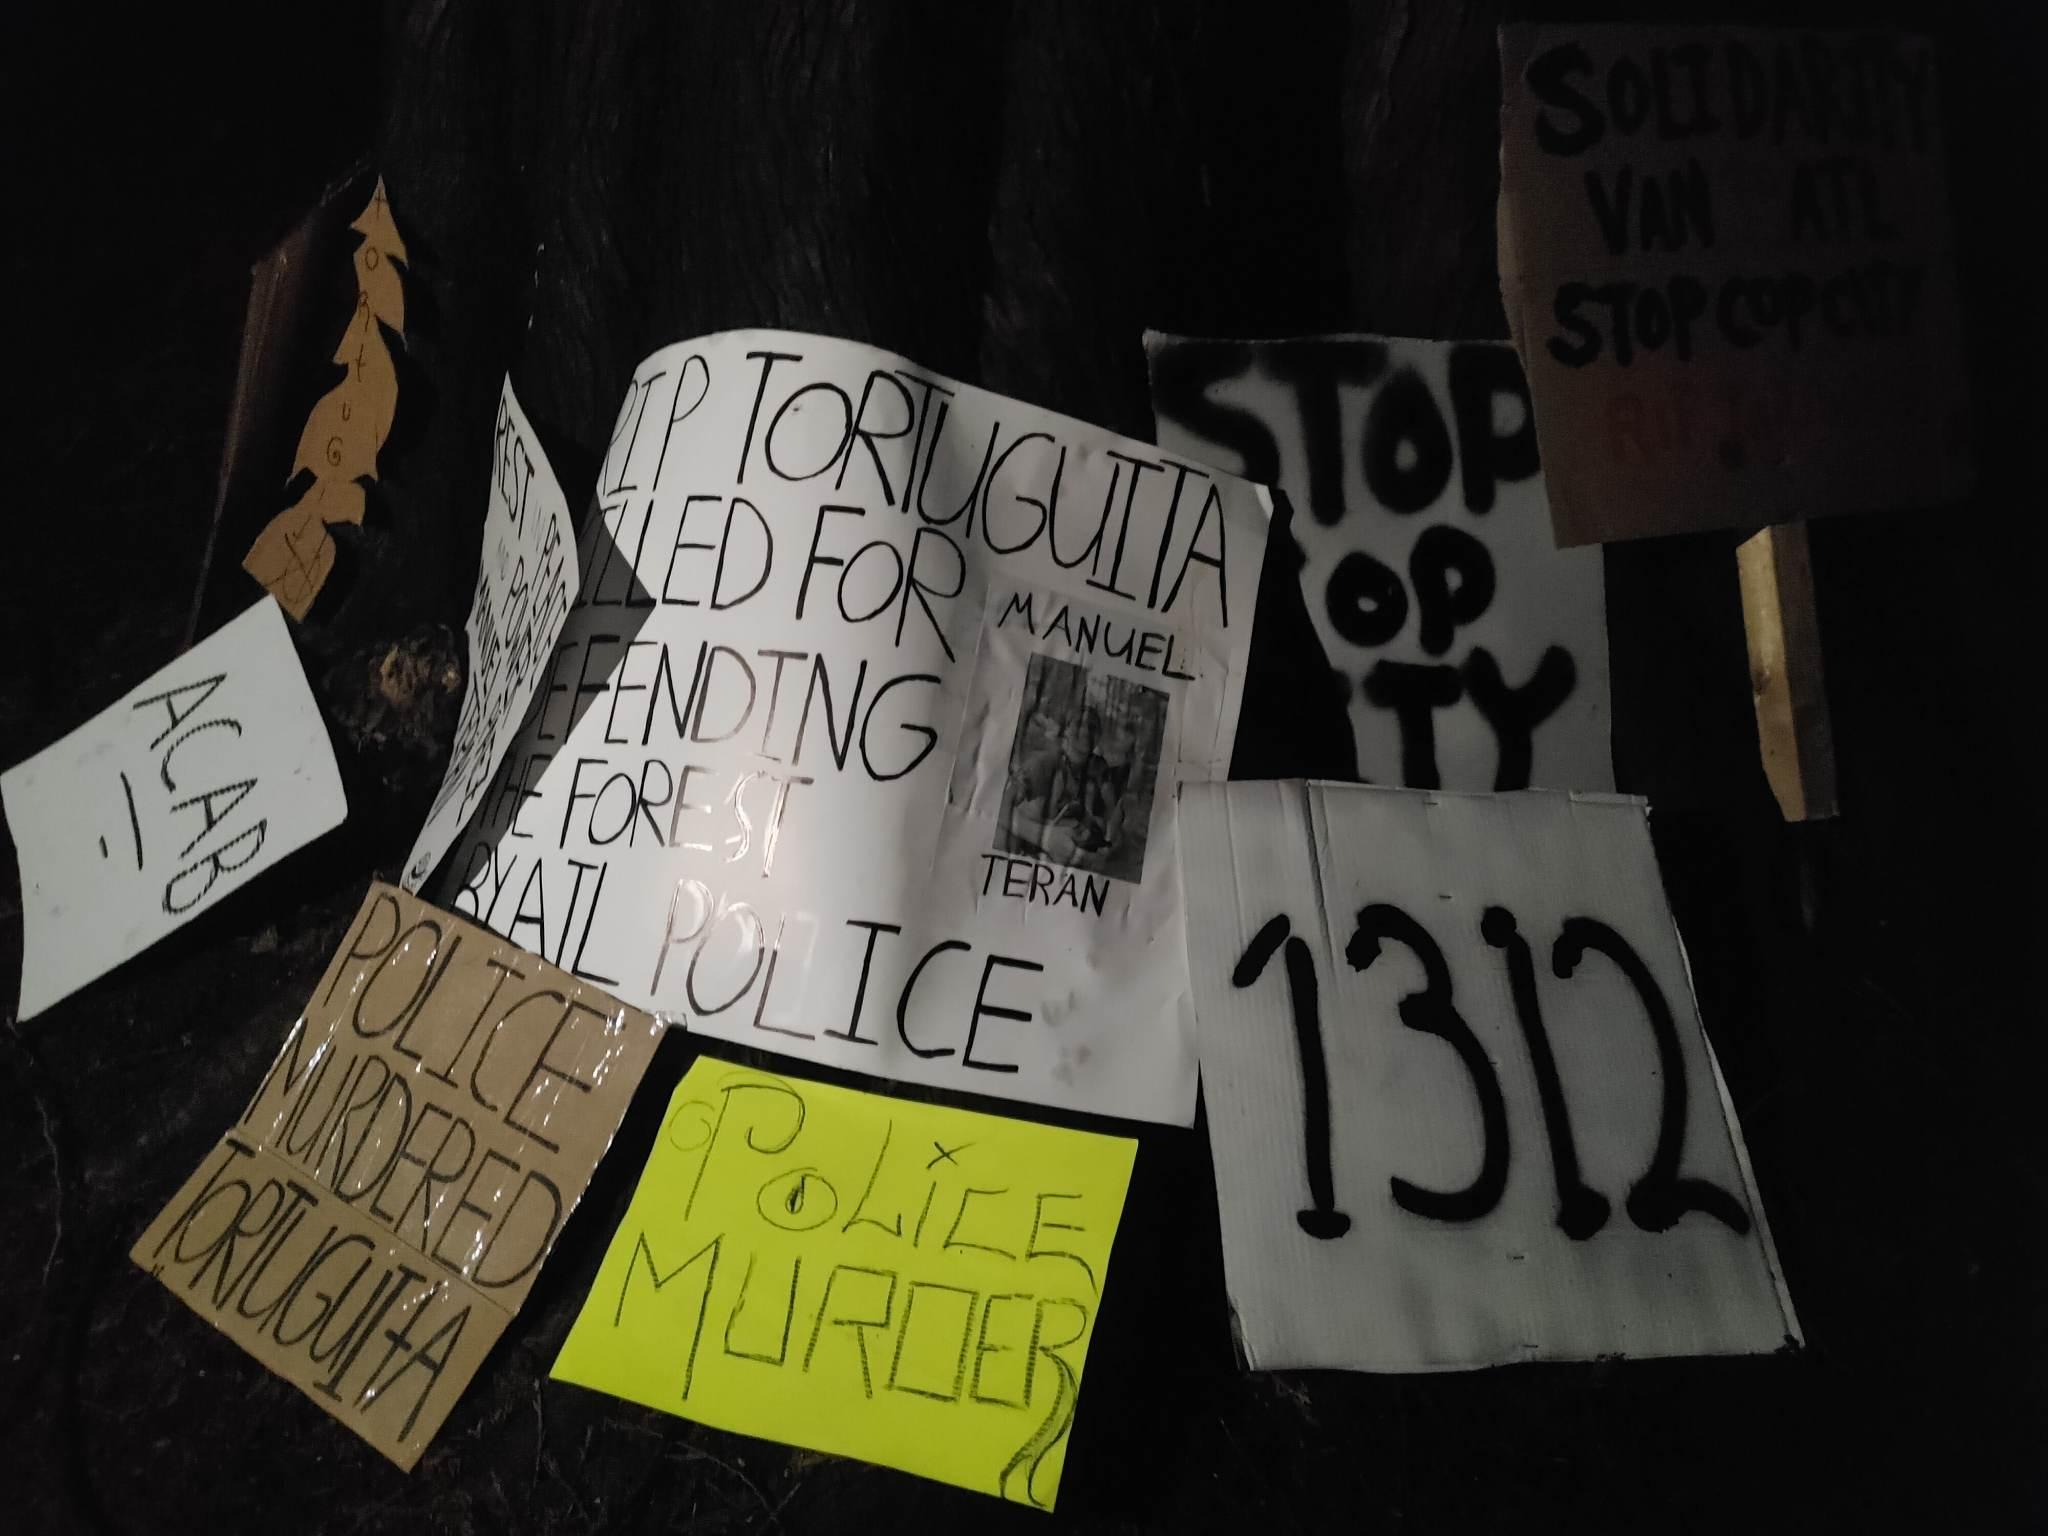 A stack of signs lay propped against a wall. They include "ACAB", "POLICE MURDERED TORTUGUITA", POLICE MURDER", "1312", "RIP TORTUGUITA KILLED FOR DEFENDING THE FOREST BY ATL POLICE" (this sign has a picture of Tortuguita and the name "Manuel Teran" on the right side), "STOP COP CITY", and a sign that says "SOLIDARITY VAN TO ATL STOP COP CITY RIP TORTUGUITA (the final sign has some text that is out of frame.)